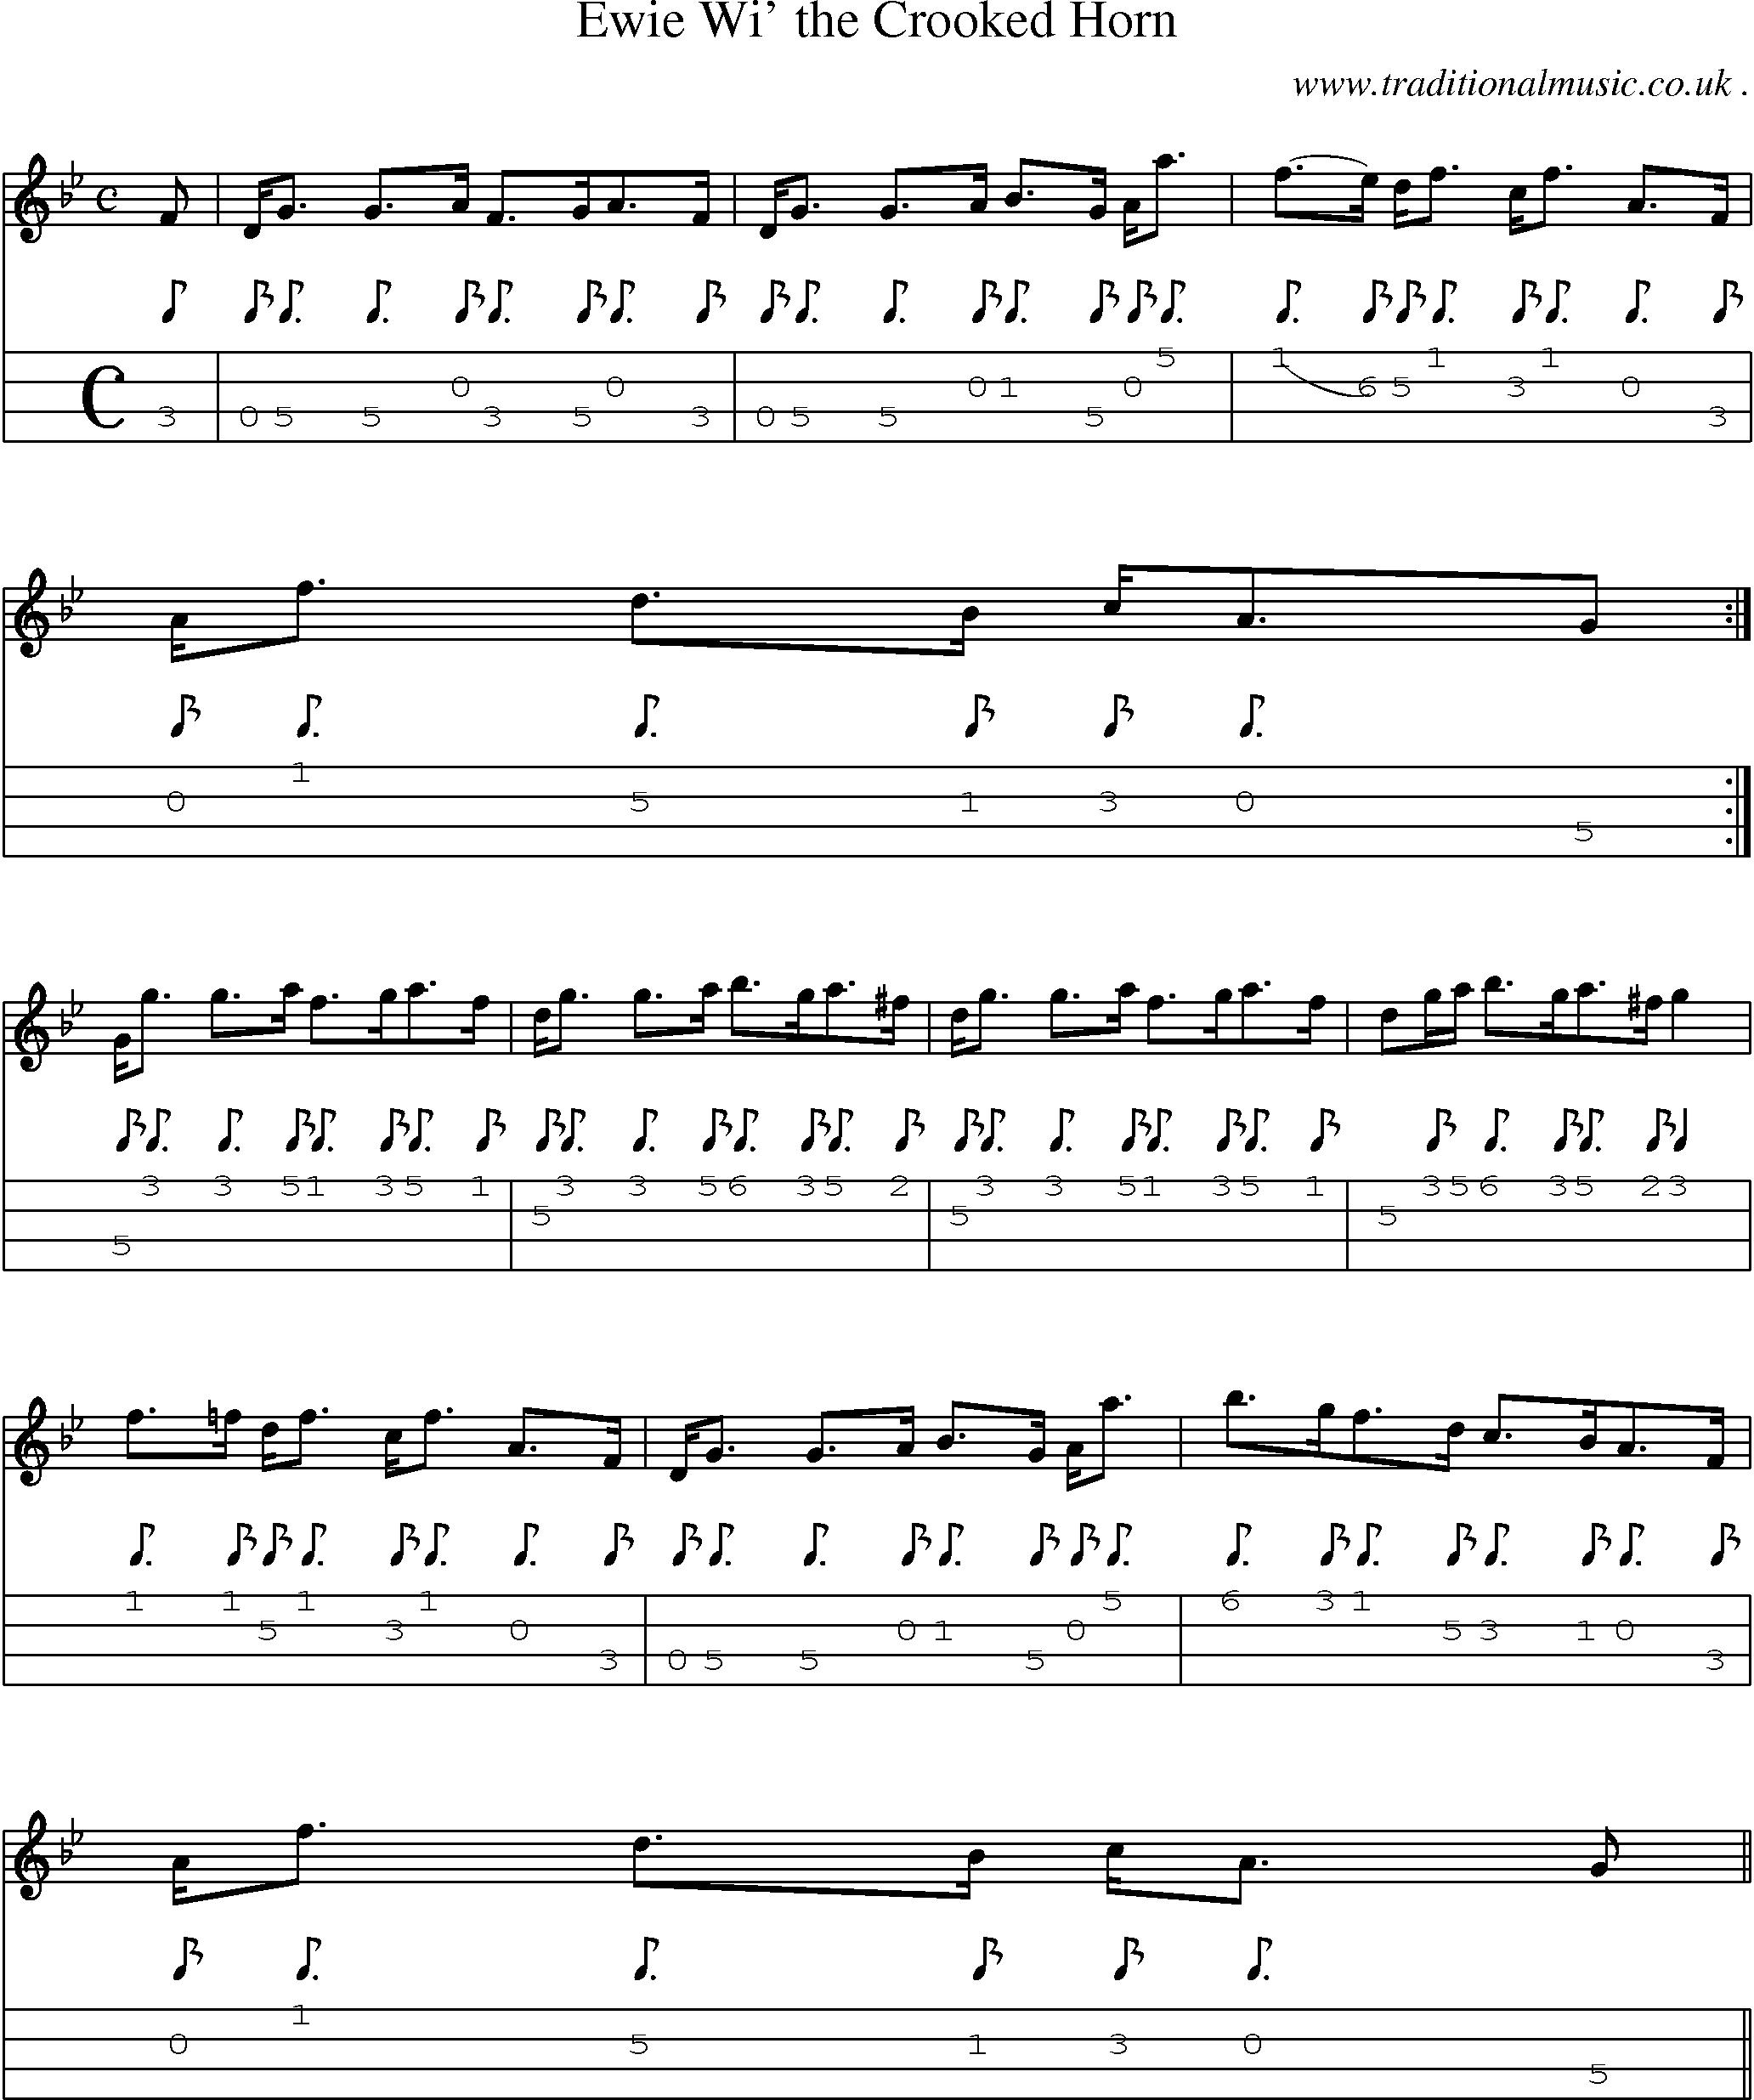 Sheet-music  score, Chords and Mandolin Tabs for Ewie Wi The Crooked Horn